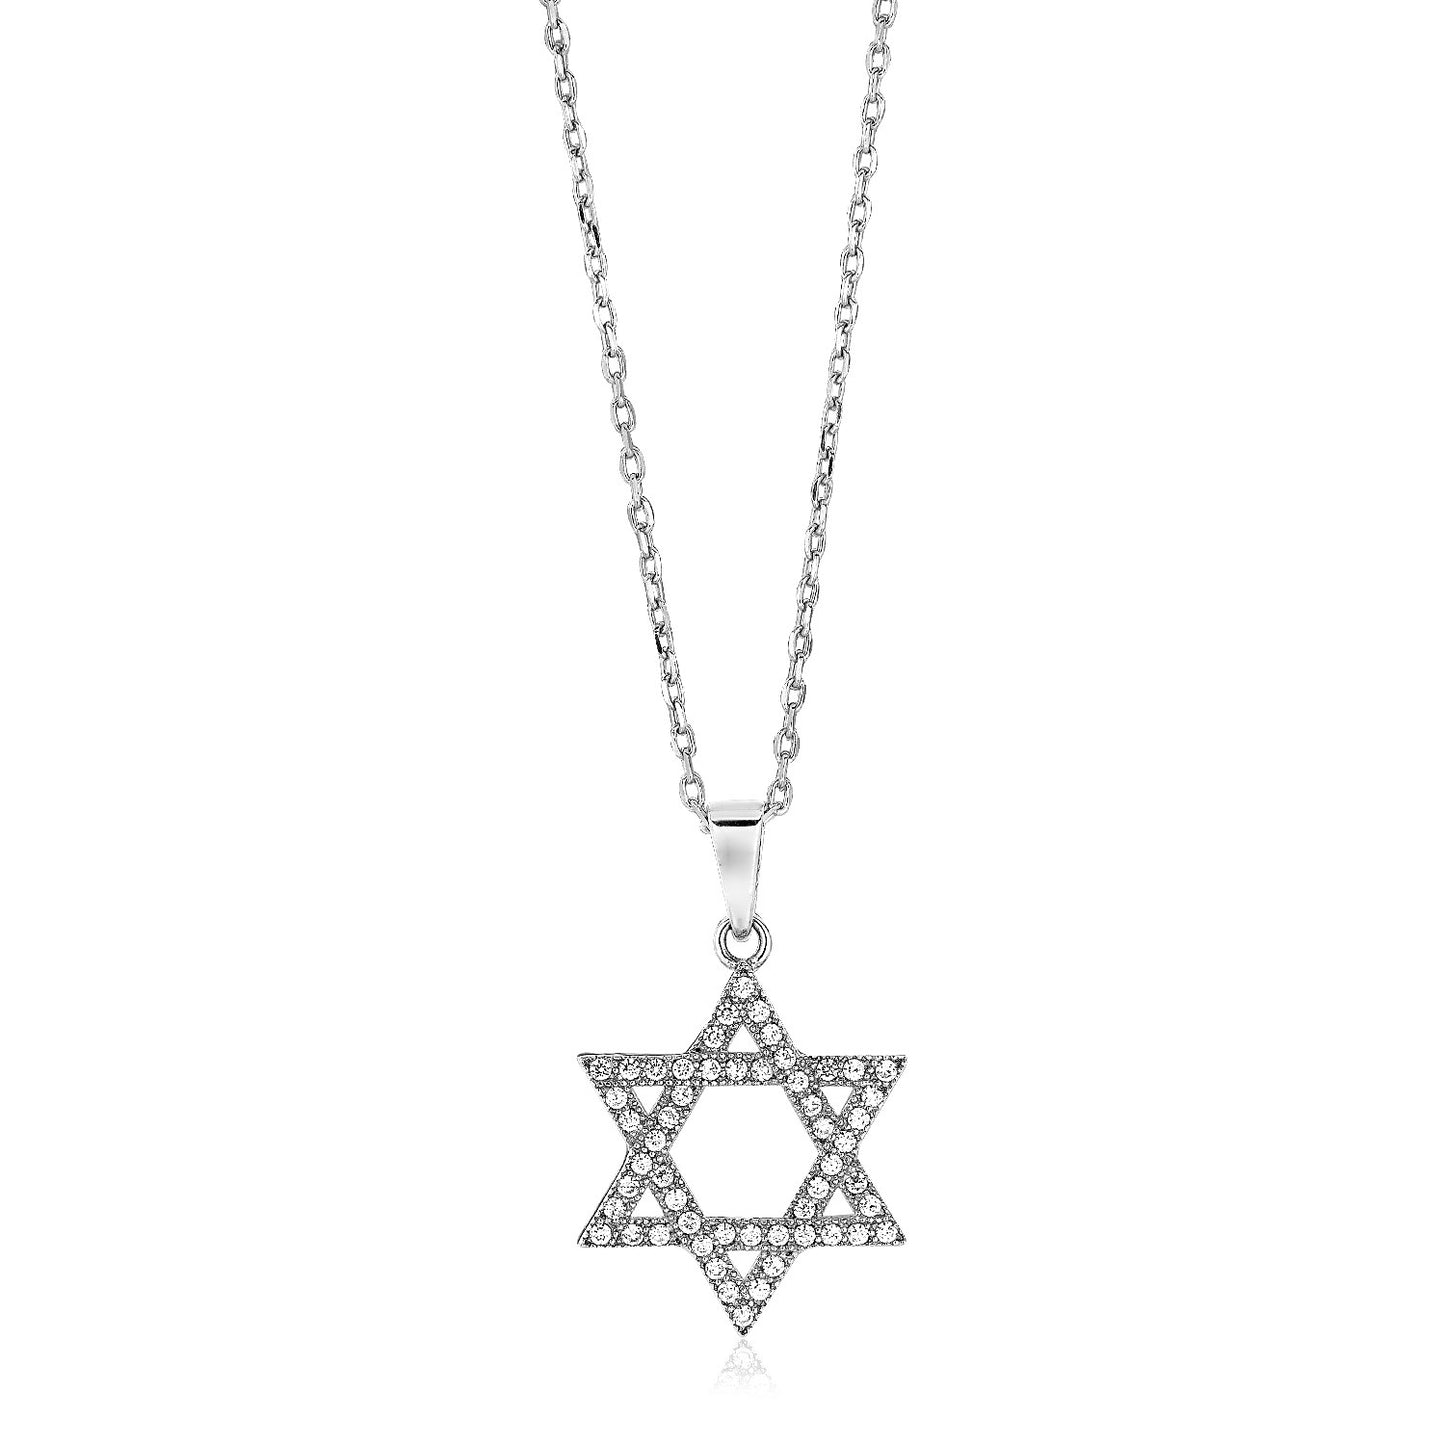 Sterling Silver Star of David Necklace with Cubic Zirconias